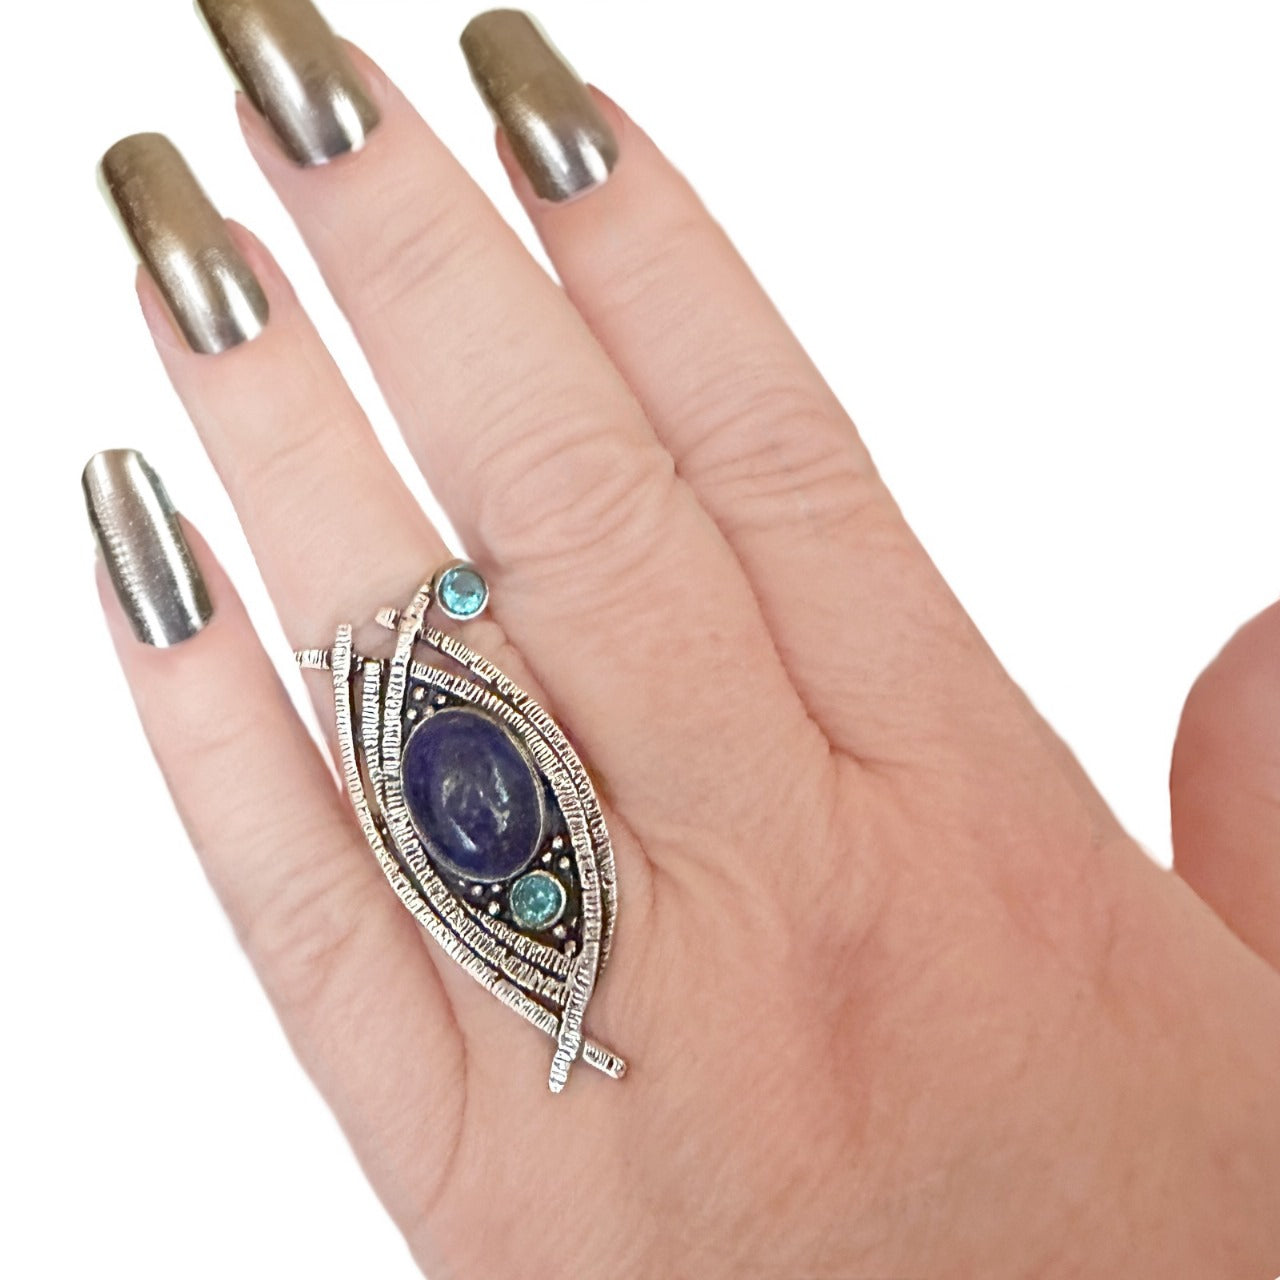 Handmade Arty Natural Lapis Lazuli and Topaz Gemstone .925 Silver Ring Size US 9 or R1/2